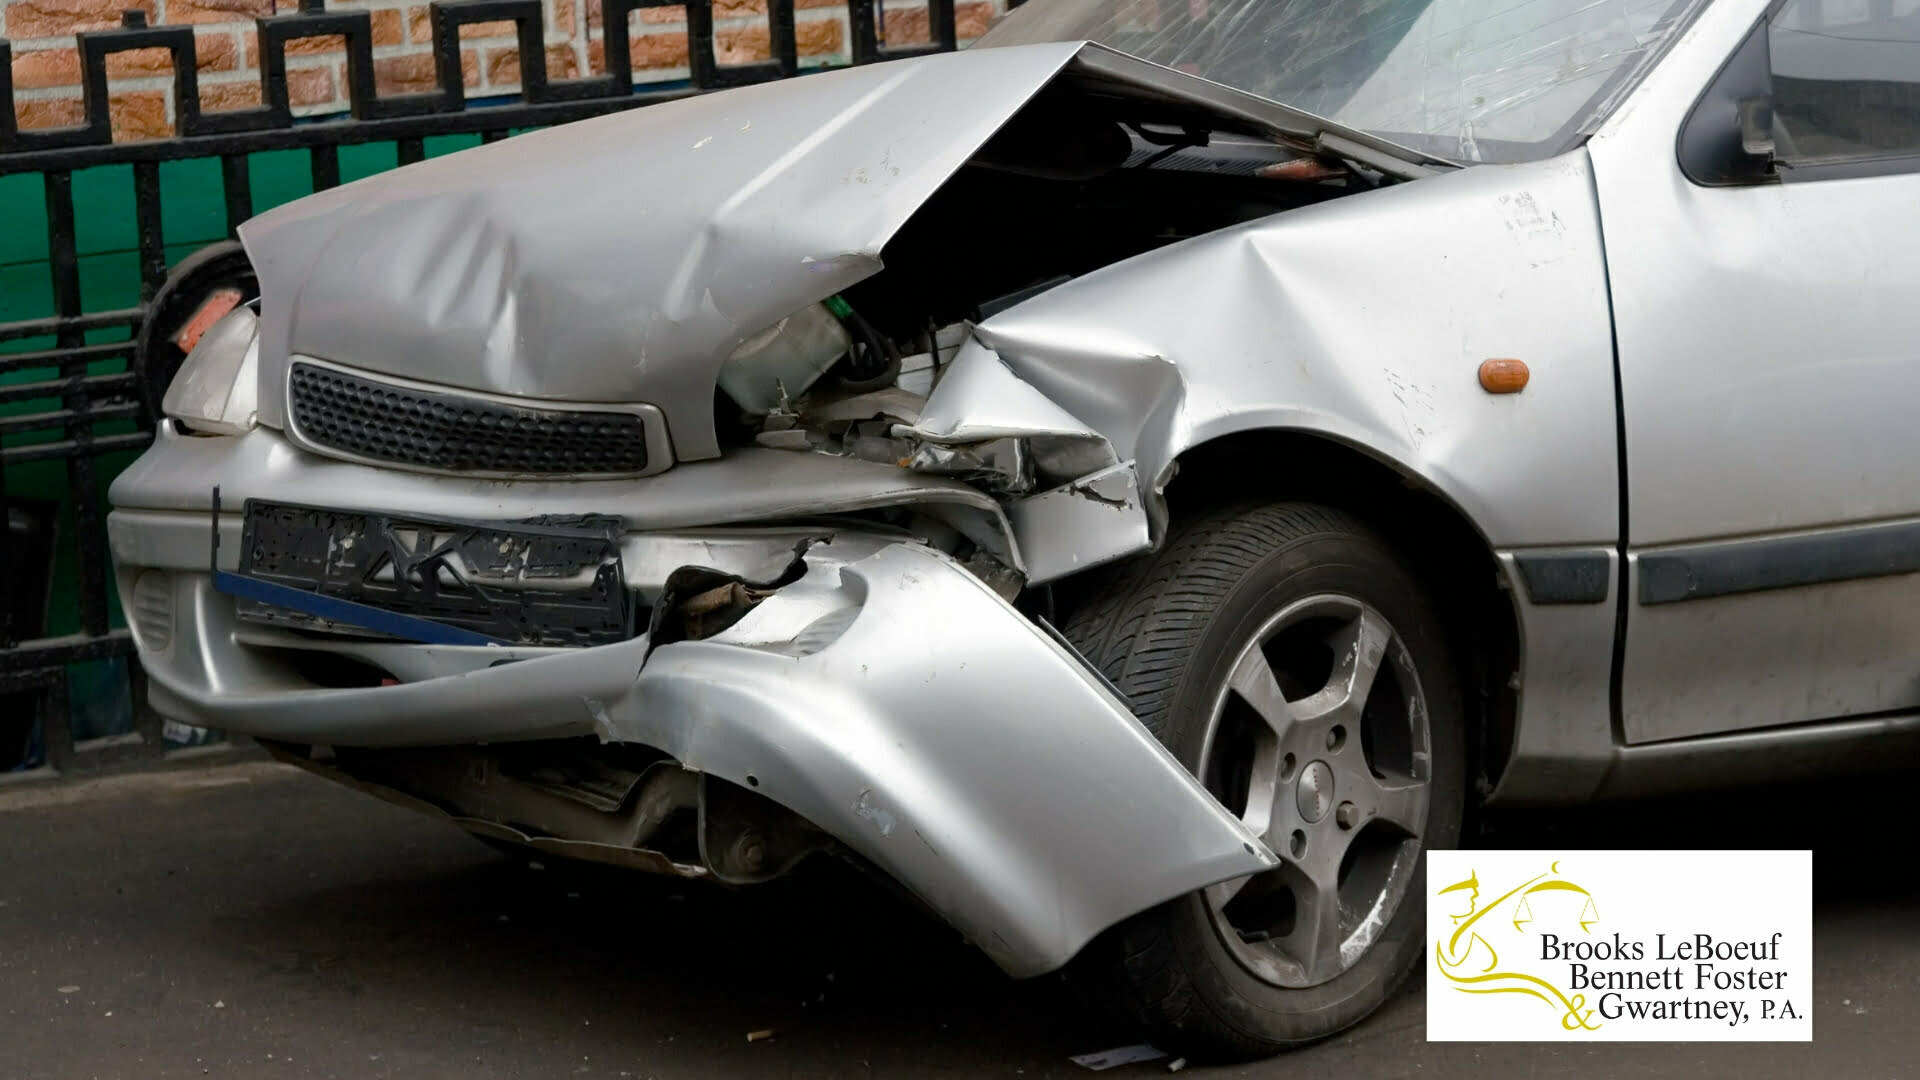 3 Factors That Can Lead to Car Accidents